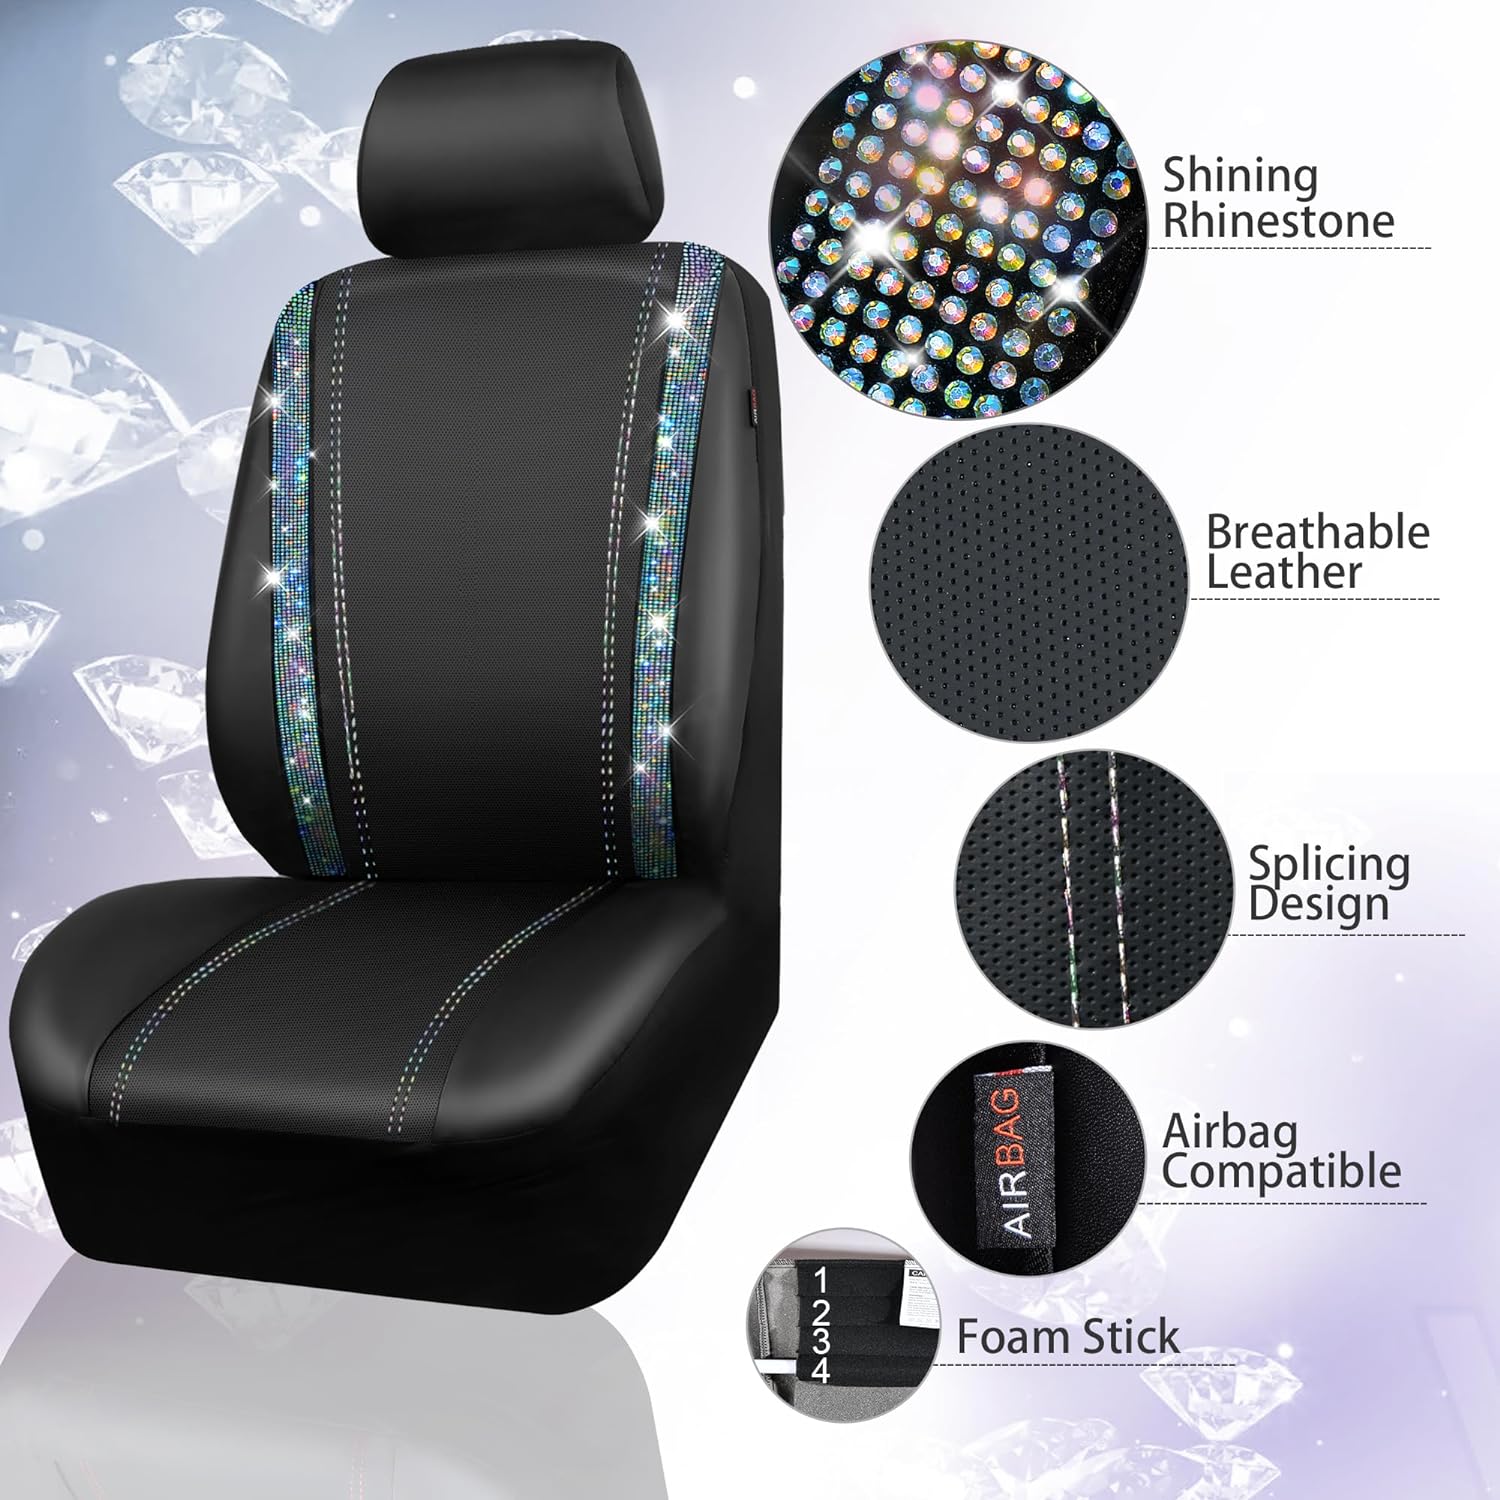 CAR PASS Leather Diamond Bling Car Seat Cover 2 Front Interior Sets, Waterproof Universal Shining Glitter Crystal Sparkle Fit for 95% Automotive Truck SUV Cute Women Girl